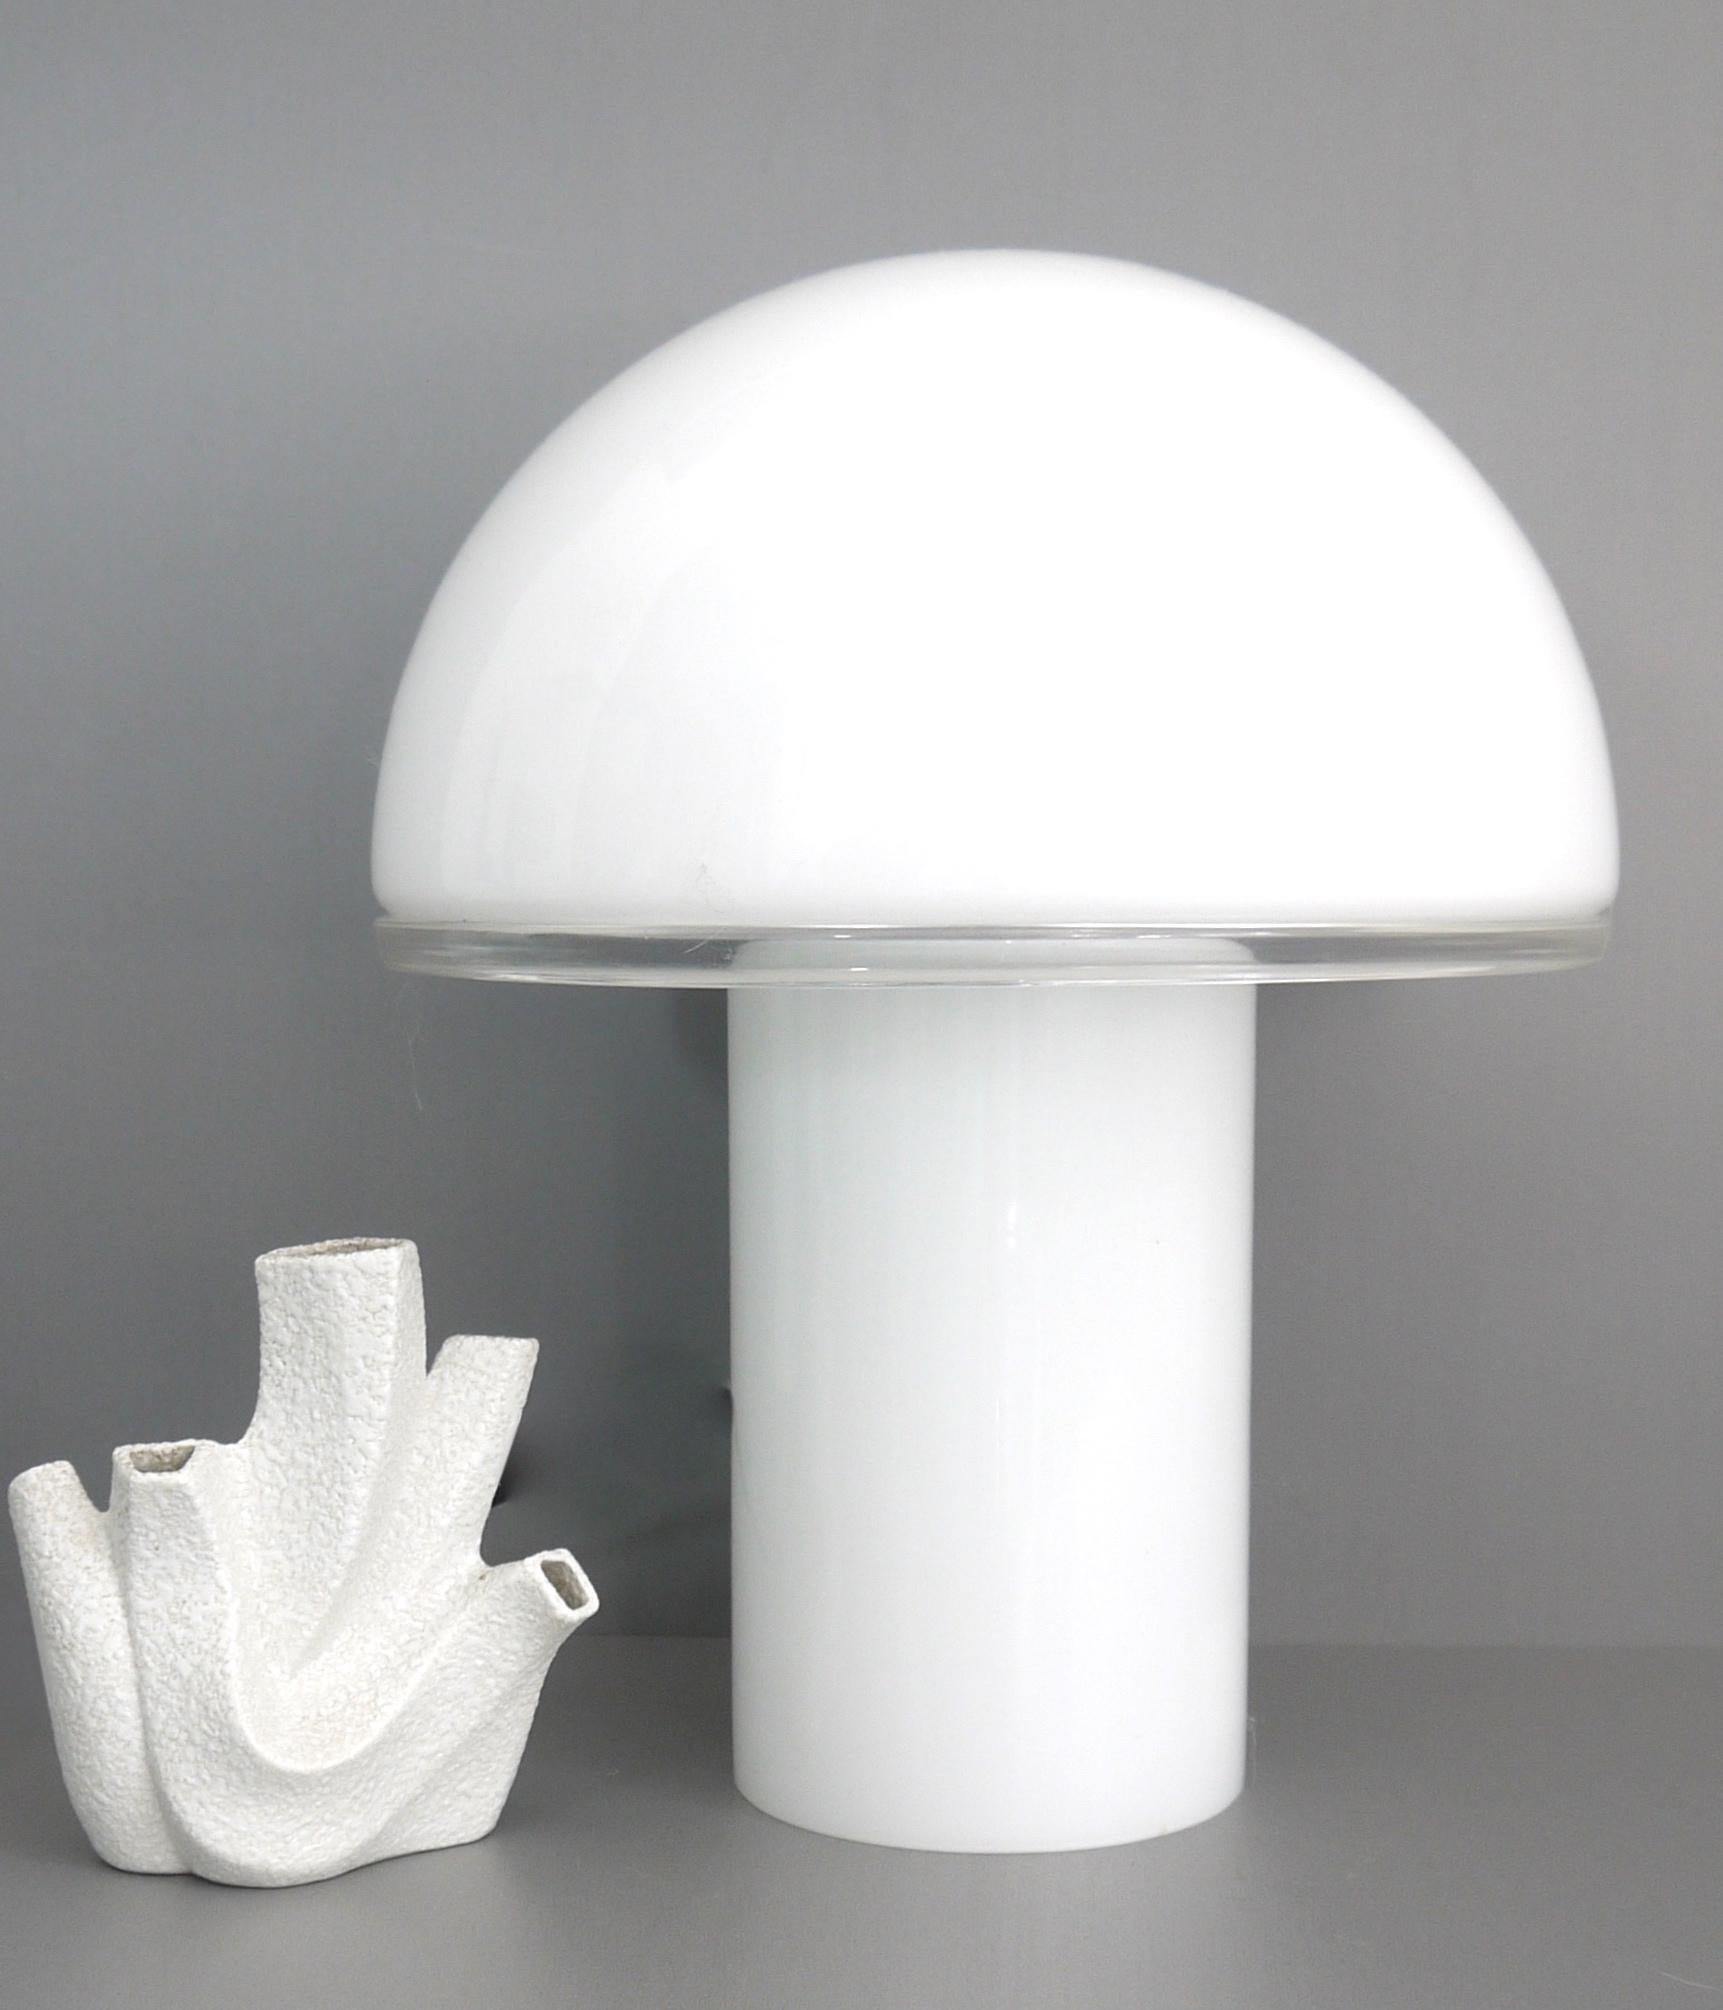 Murano Onfale Mushroom Opaline Lamp Luciano Vistosi for Artemide, 1978 In Good Condition For Sale In Halstead, GB